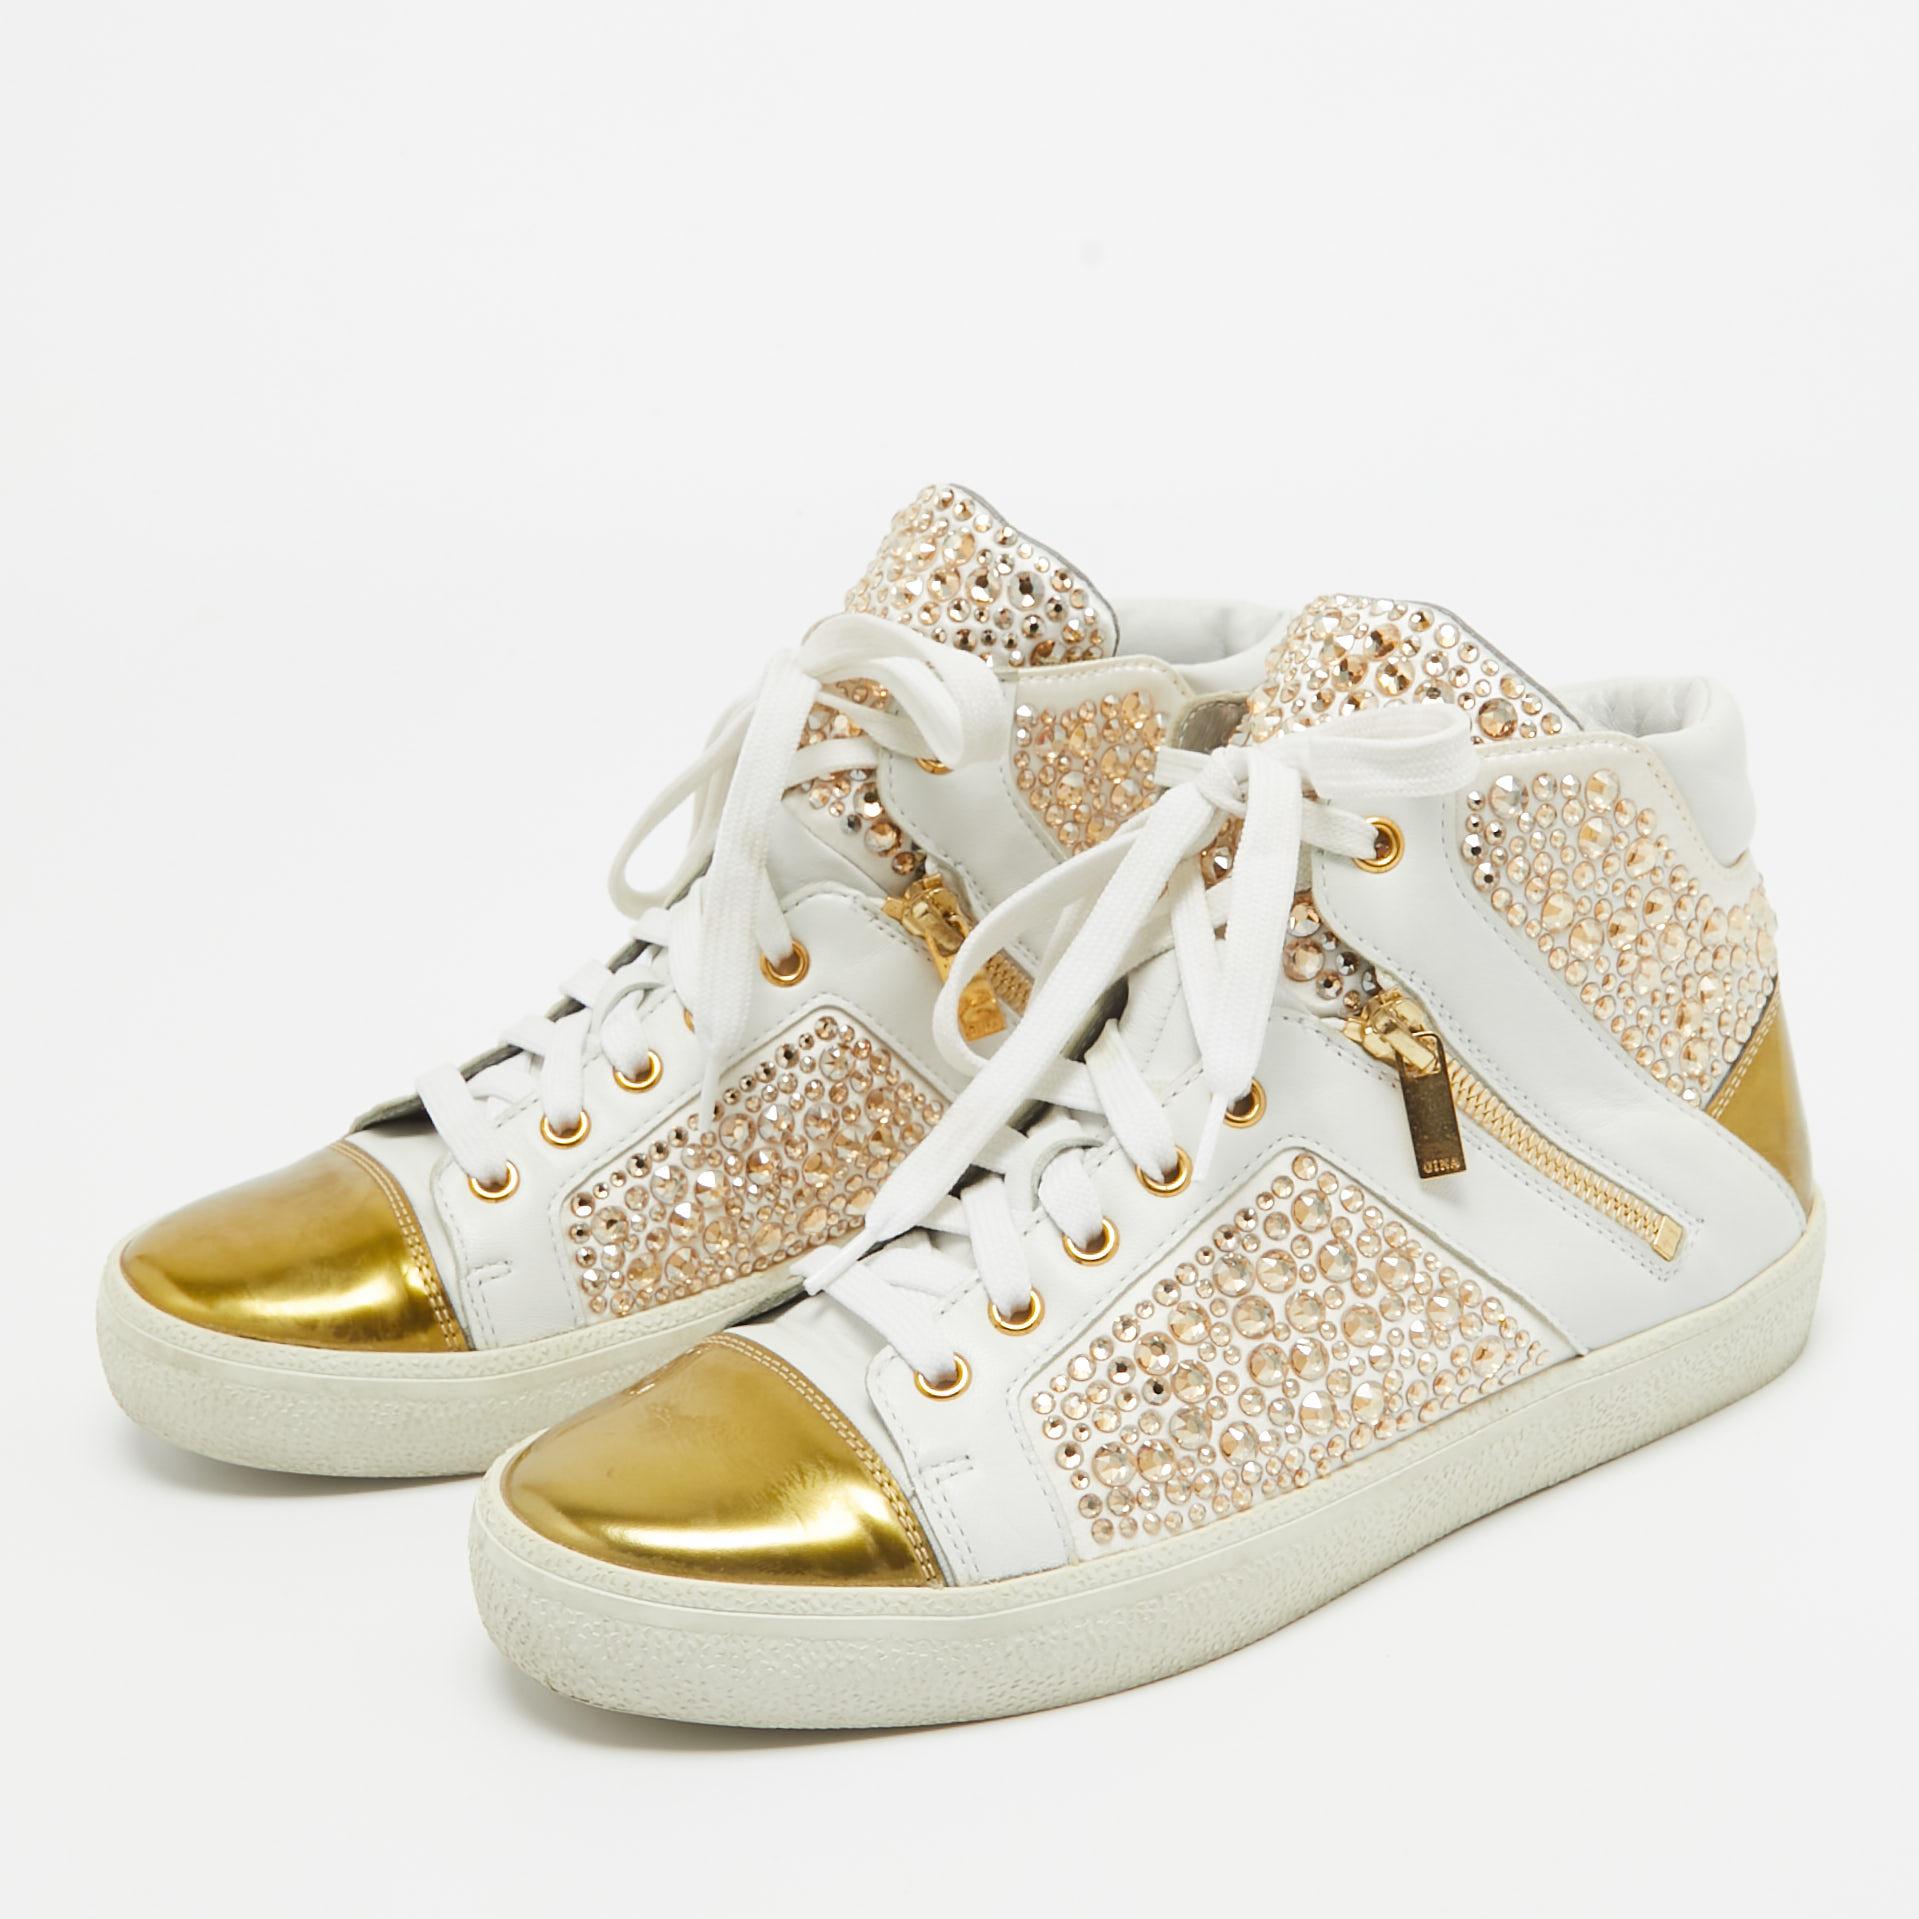 Gina White/Gold Leather Strass Embellished High Top Sneakers Size 39 For Sale 4